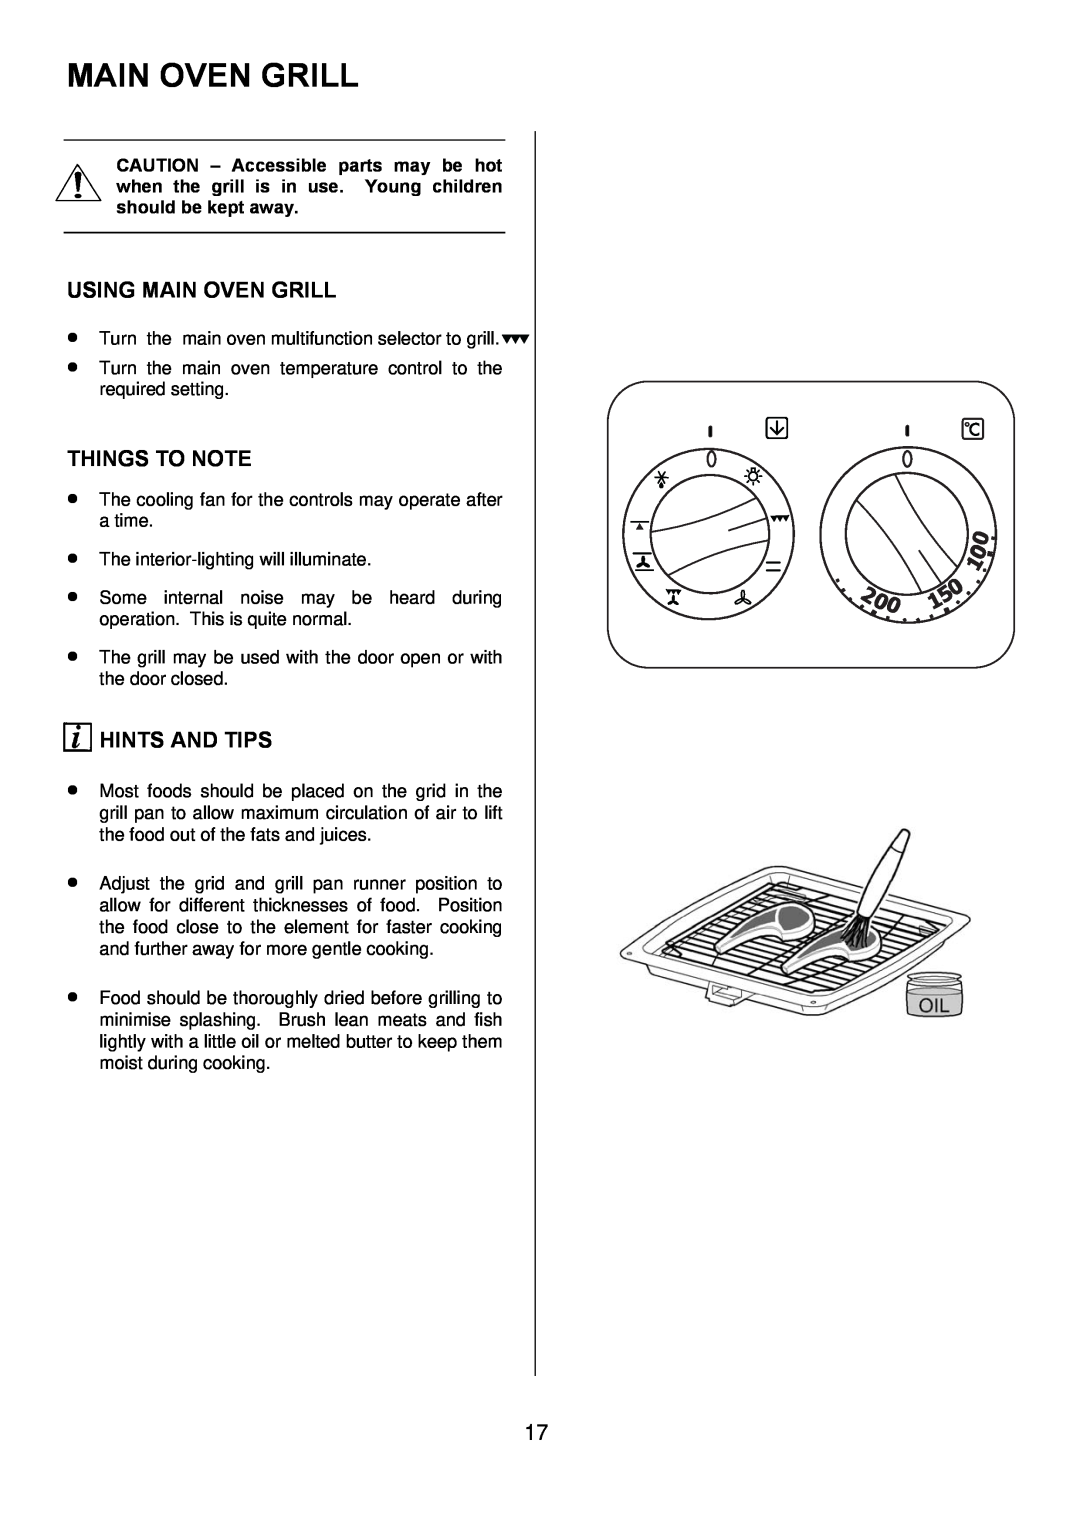 Electrolux D77000GF operating instructions Using Main Oven Grill, Things To Note, Hints And Tips 